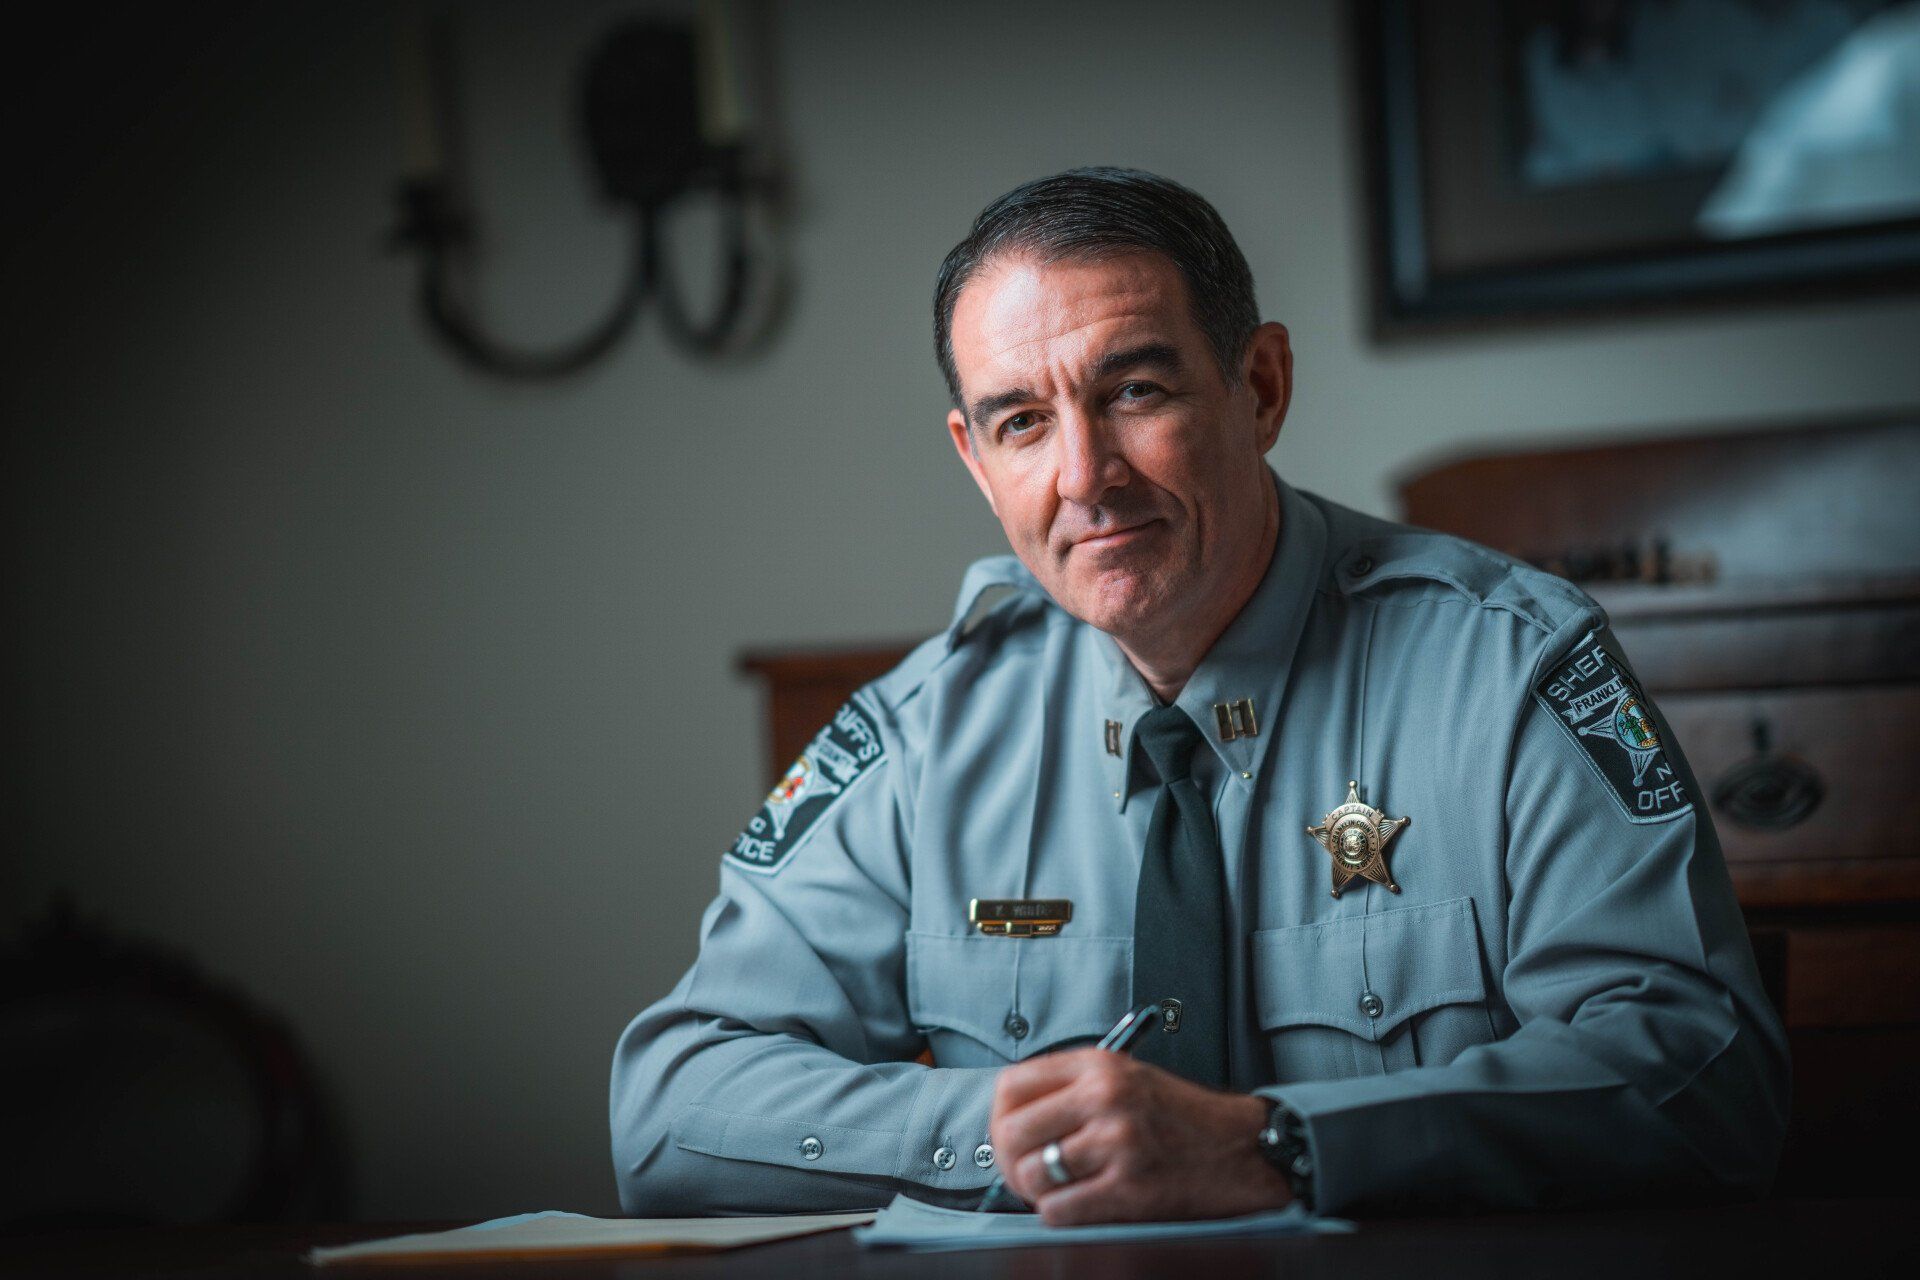 New Sheriff Elected! Congratulations to Sheriff Elect Kevin White.